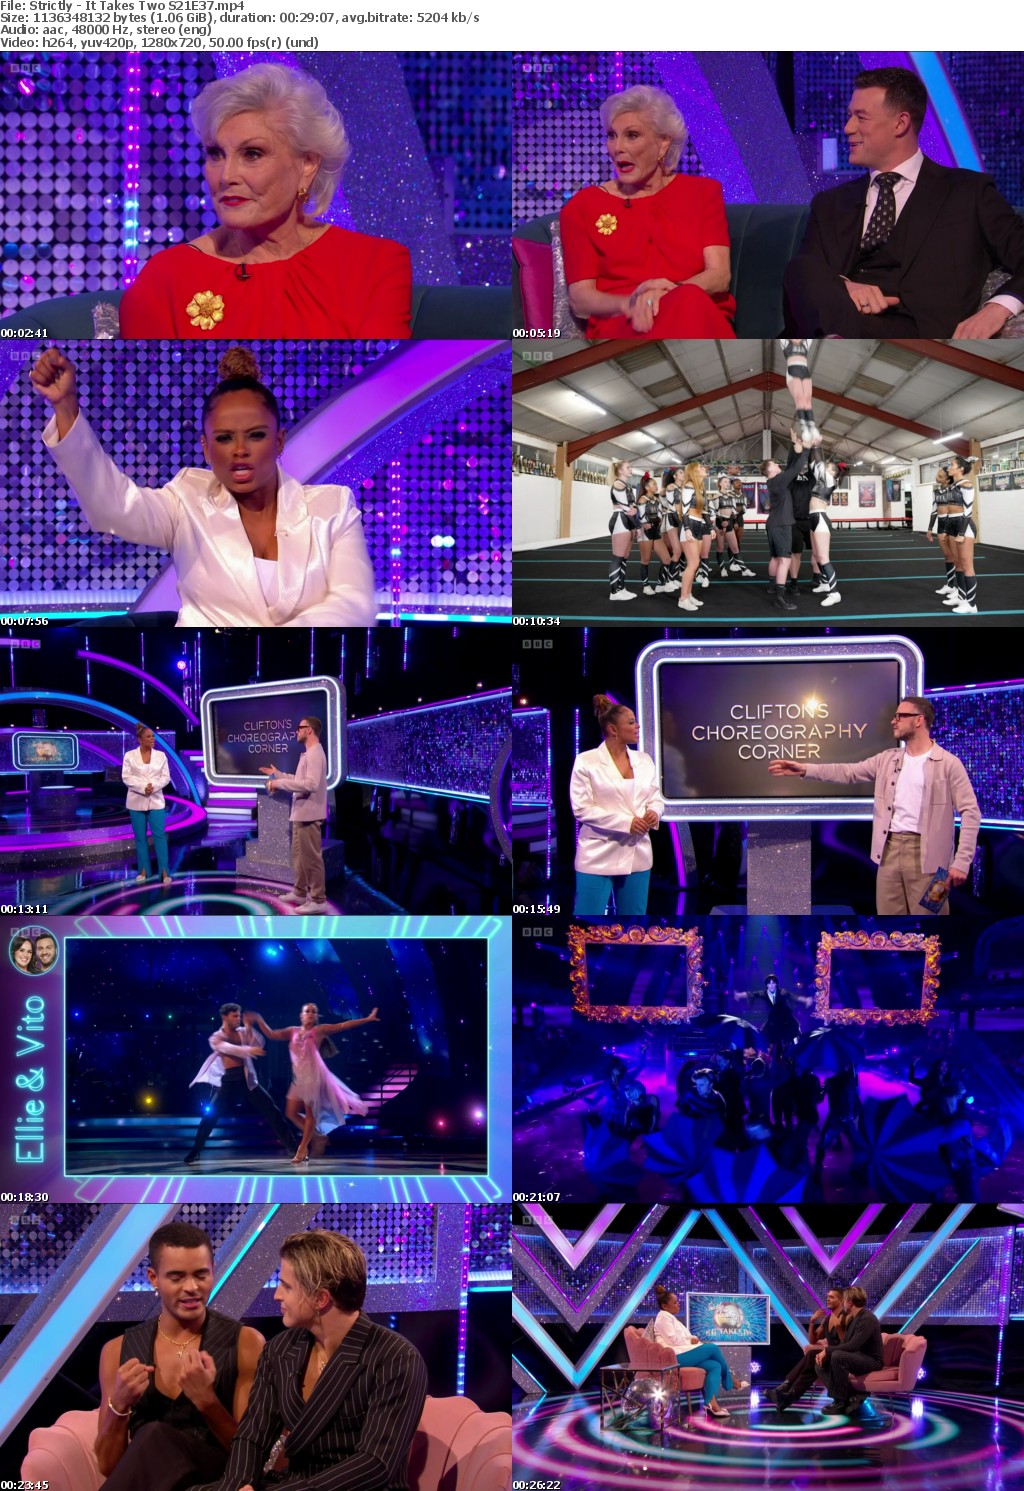 Strictly - It Takes Two S21E37 (1280x720p HD, 50fps, soft Eng subs) Strictly - It Takes Two S21E37 (1280x720p HD, 50fps, soft Eng subs)